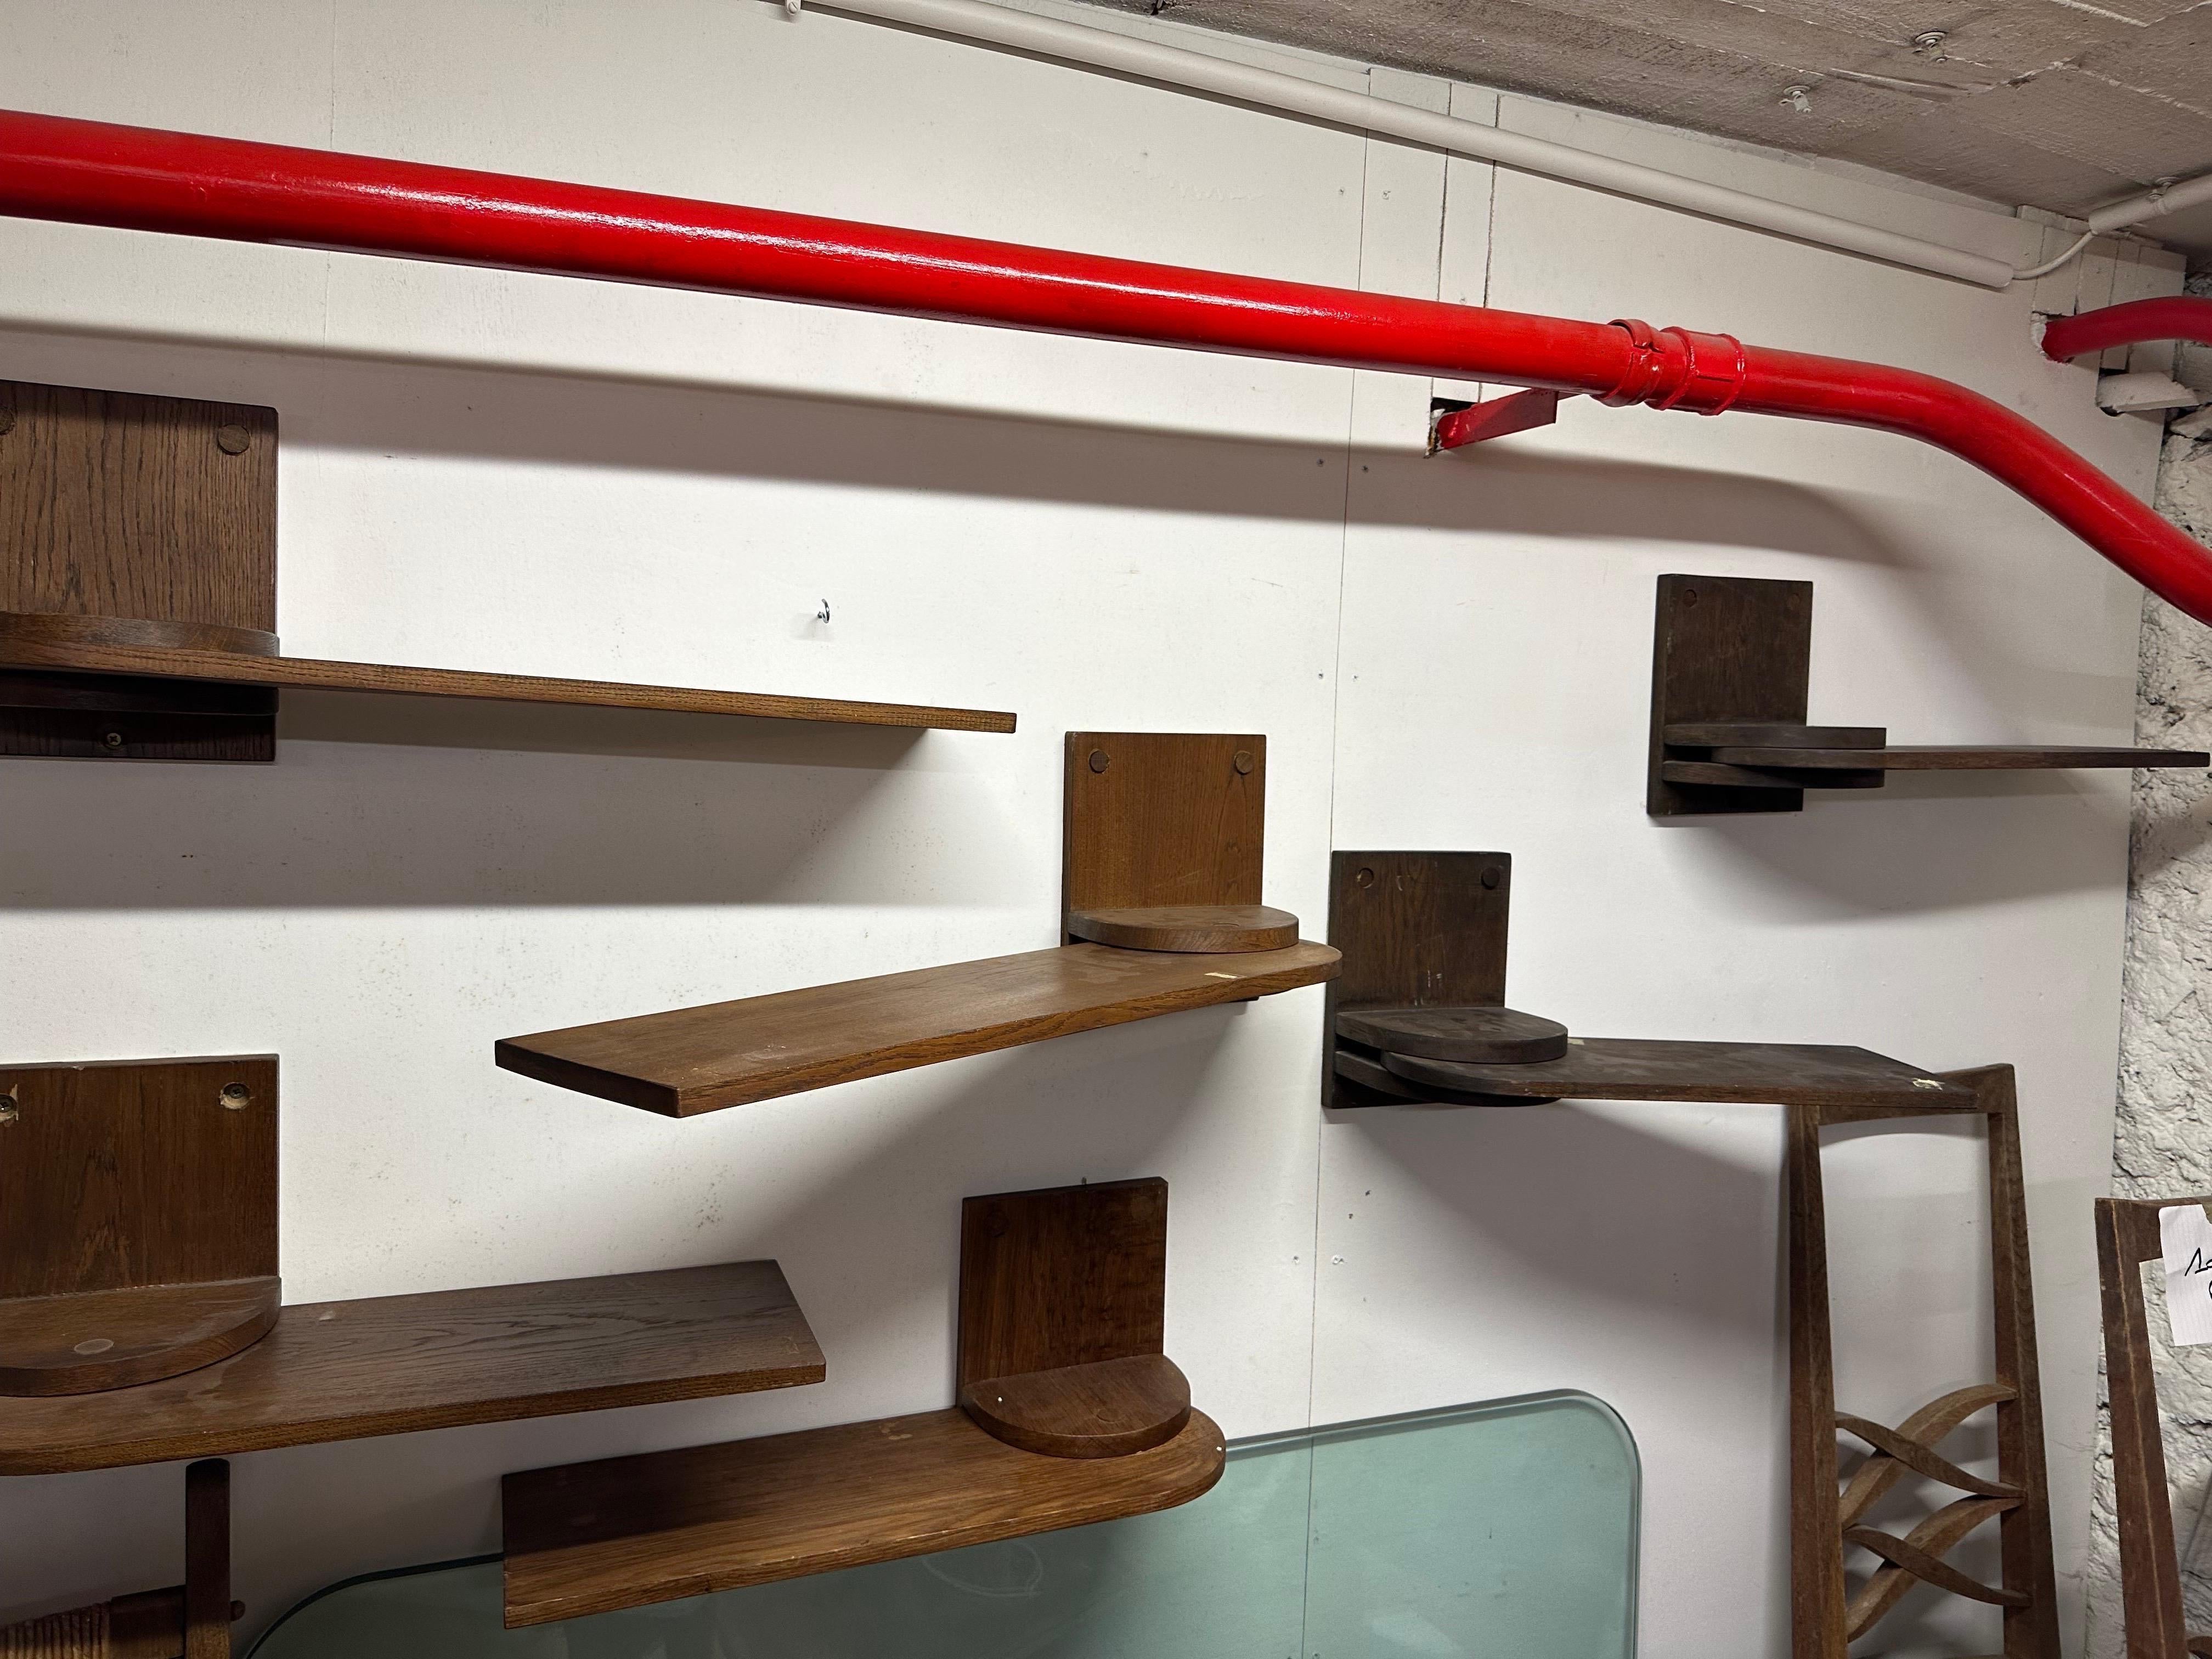 Guillerme et Chambron customs made shelves in oak
one of the king